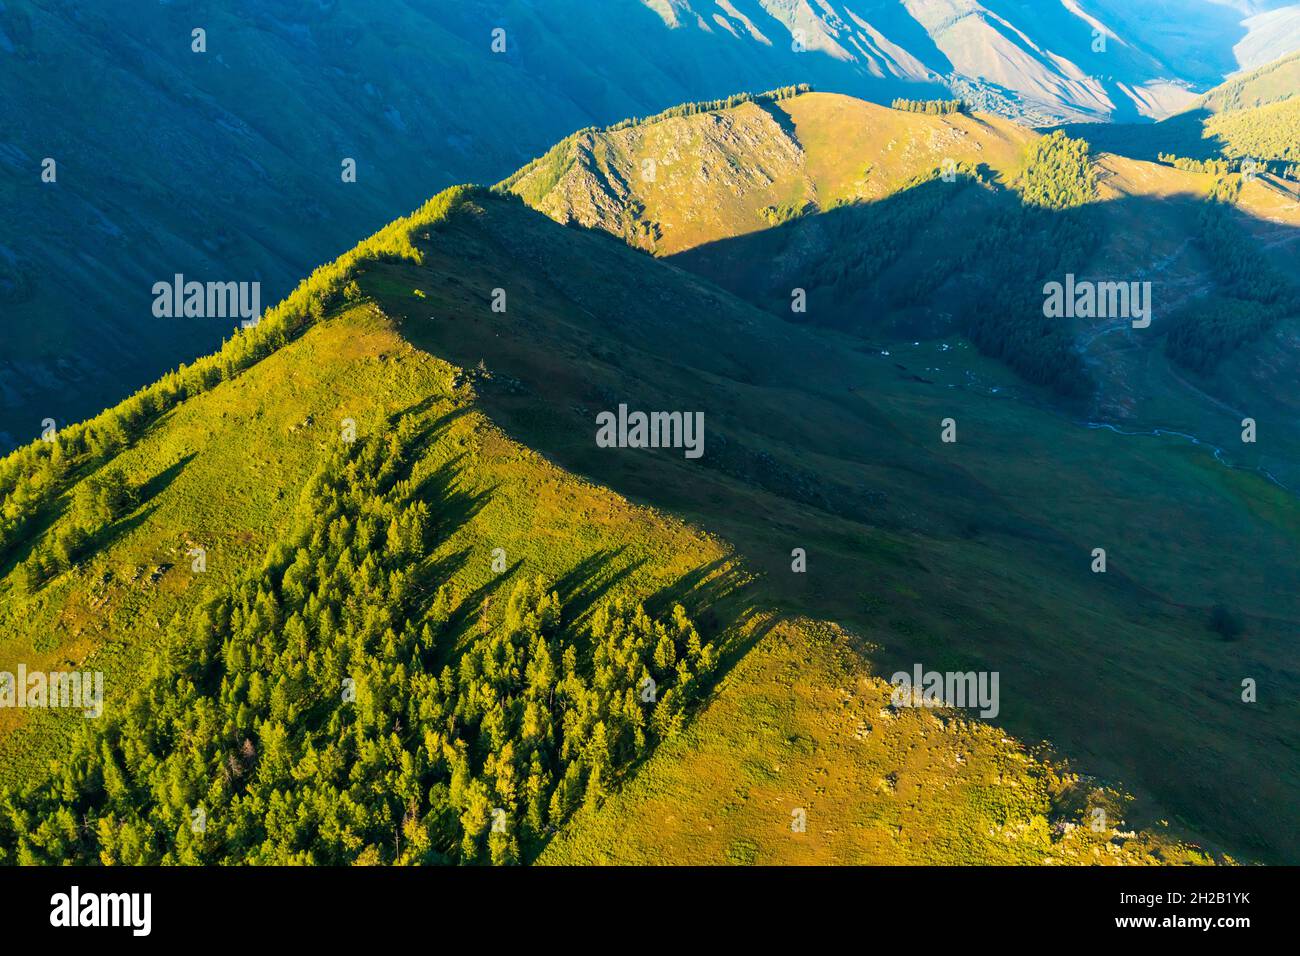 Aerial View of mountain and green forest with grass in Kanas Scenic Area,Xinjiang,China. Stock Photo